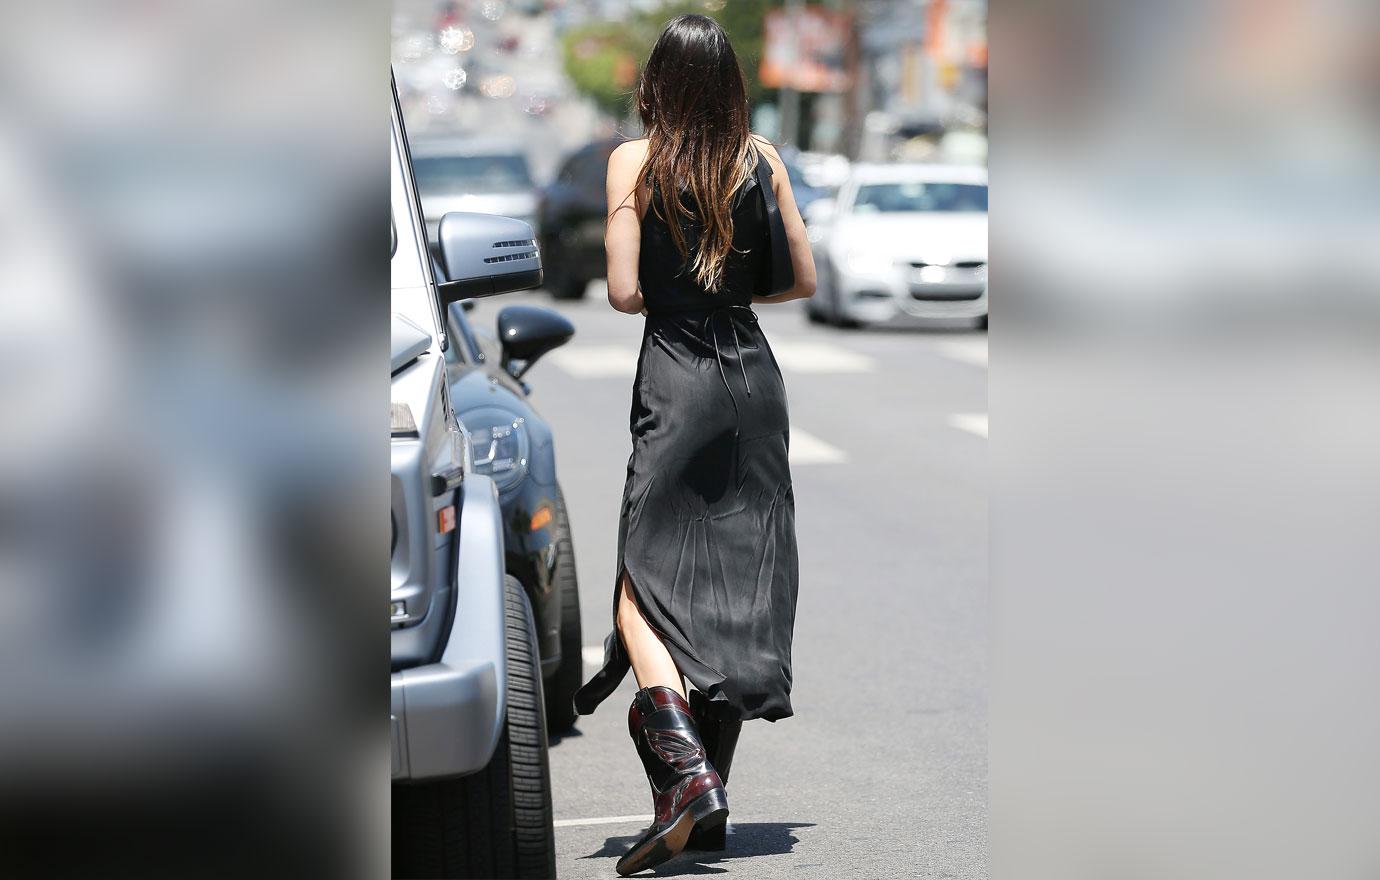 Kendall Jenner, Urban Cowgirl, Brings Western-Inspired Style to